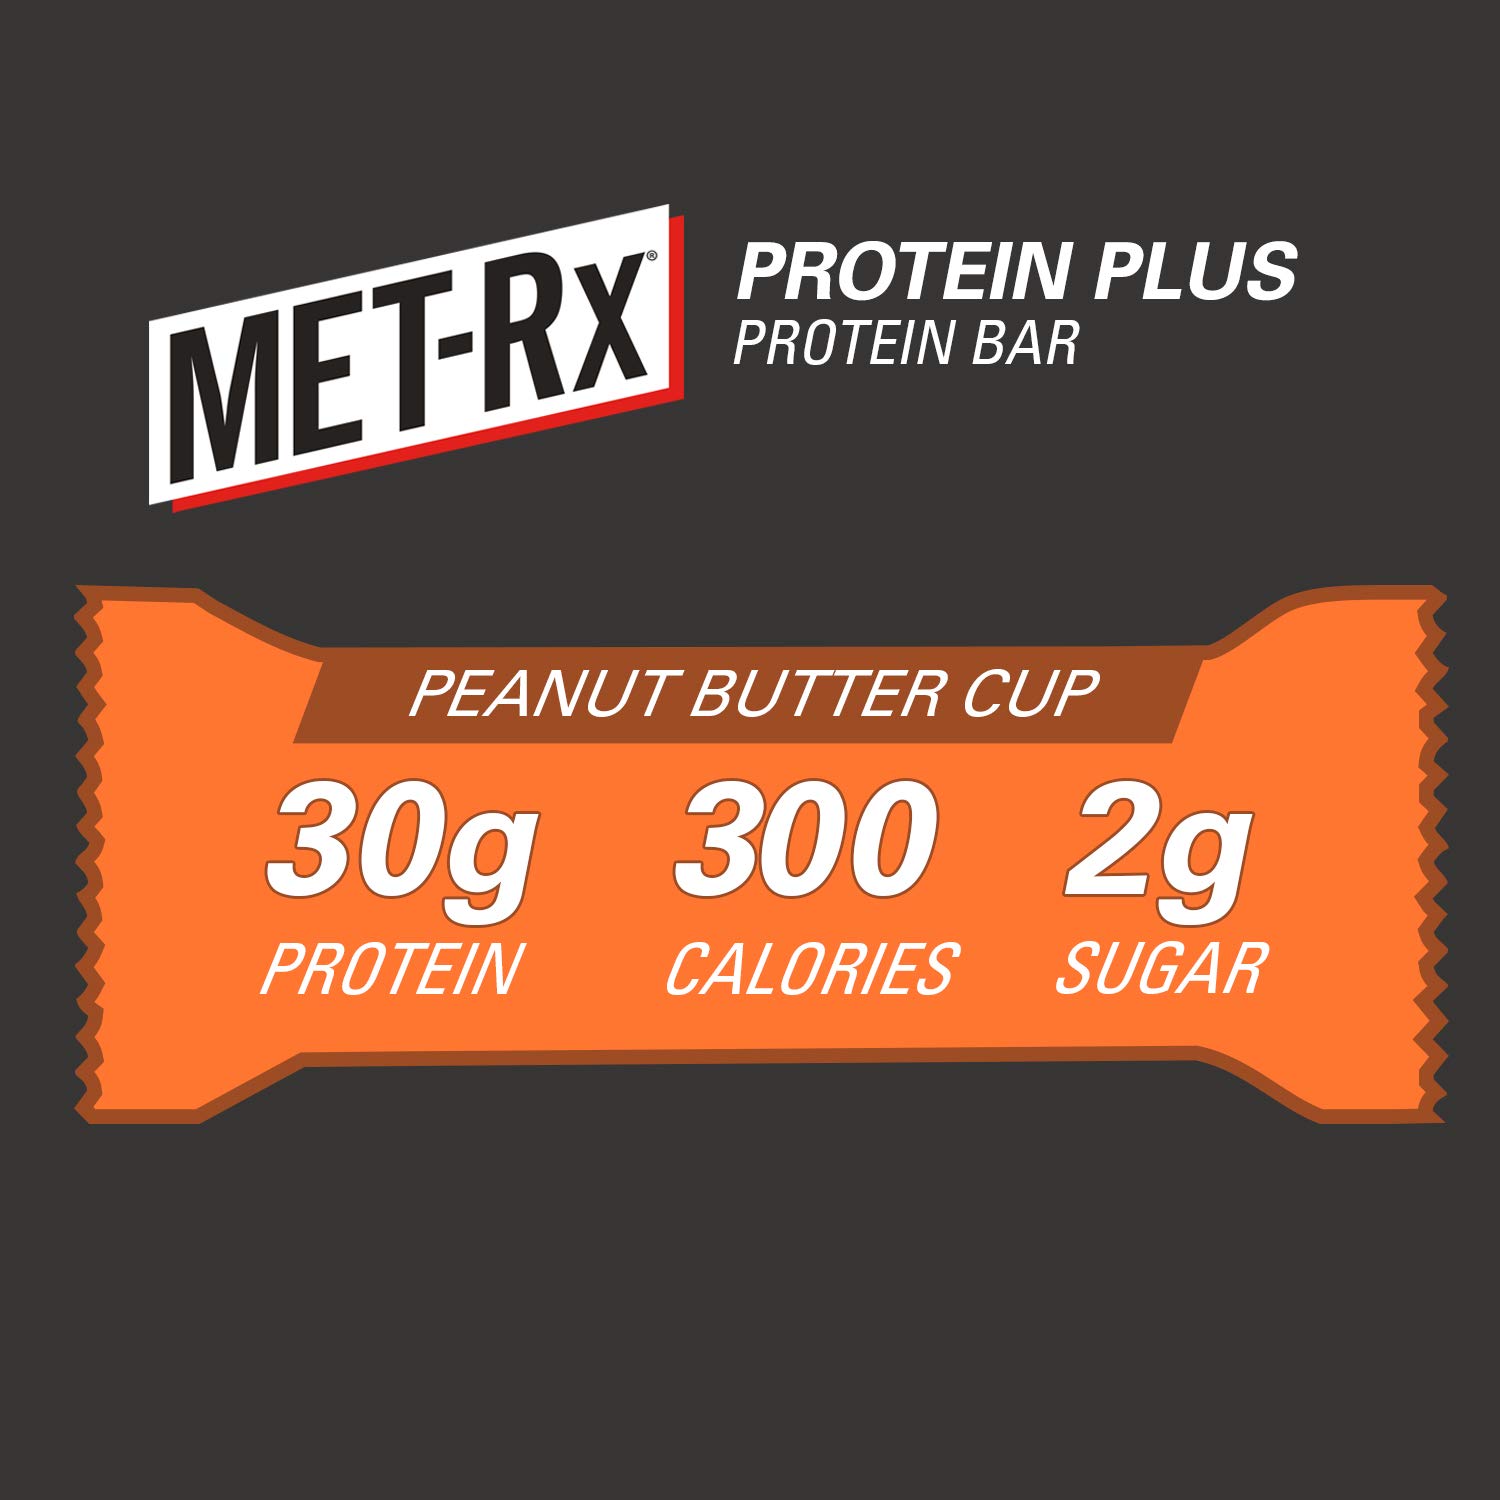 MET-Rx Protein Plus Bar, Great as Healthy Meal Replacement, Snack, and Help Support Energy, Gluten Free, Peanut Butter Cup, With Vitamin A, Vitamin C, and Zinc to Support Immune Health, 85 g, 9 Count